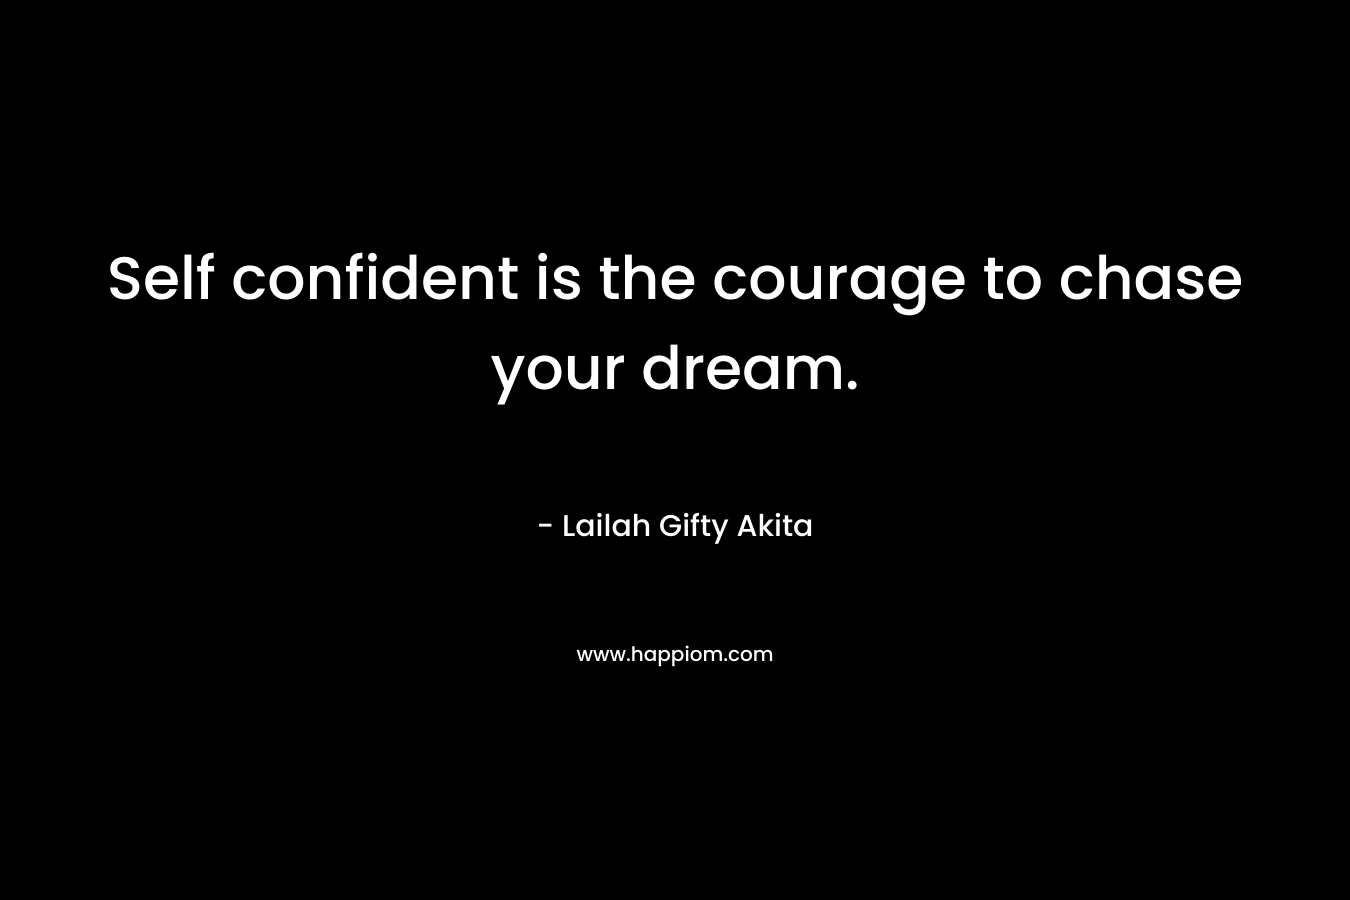 Self confident is the courage to chase your dream.